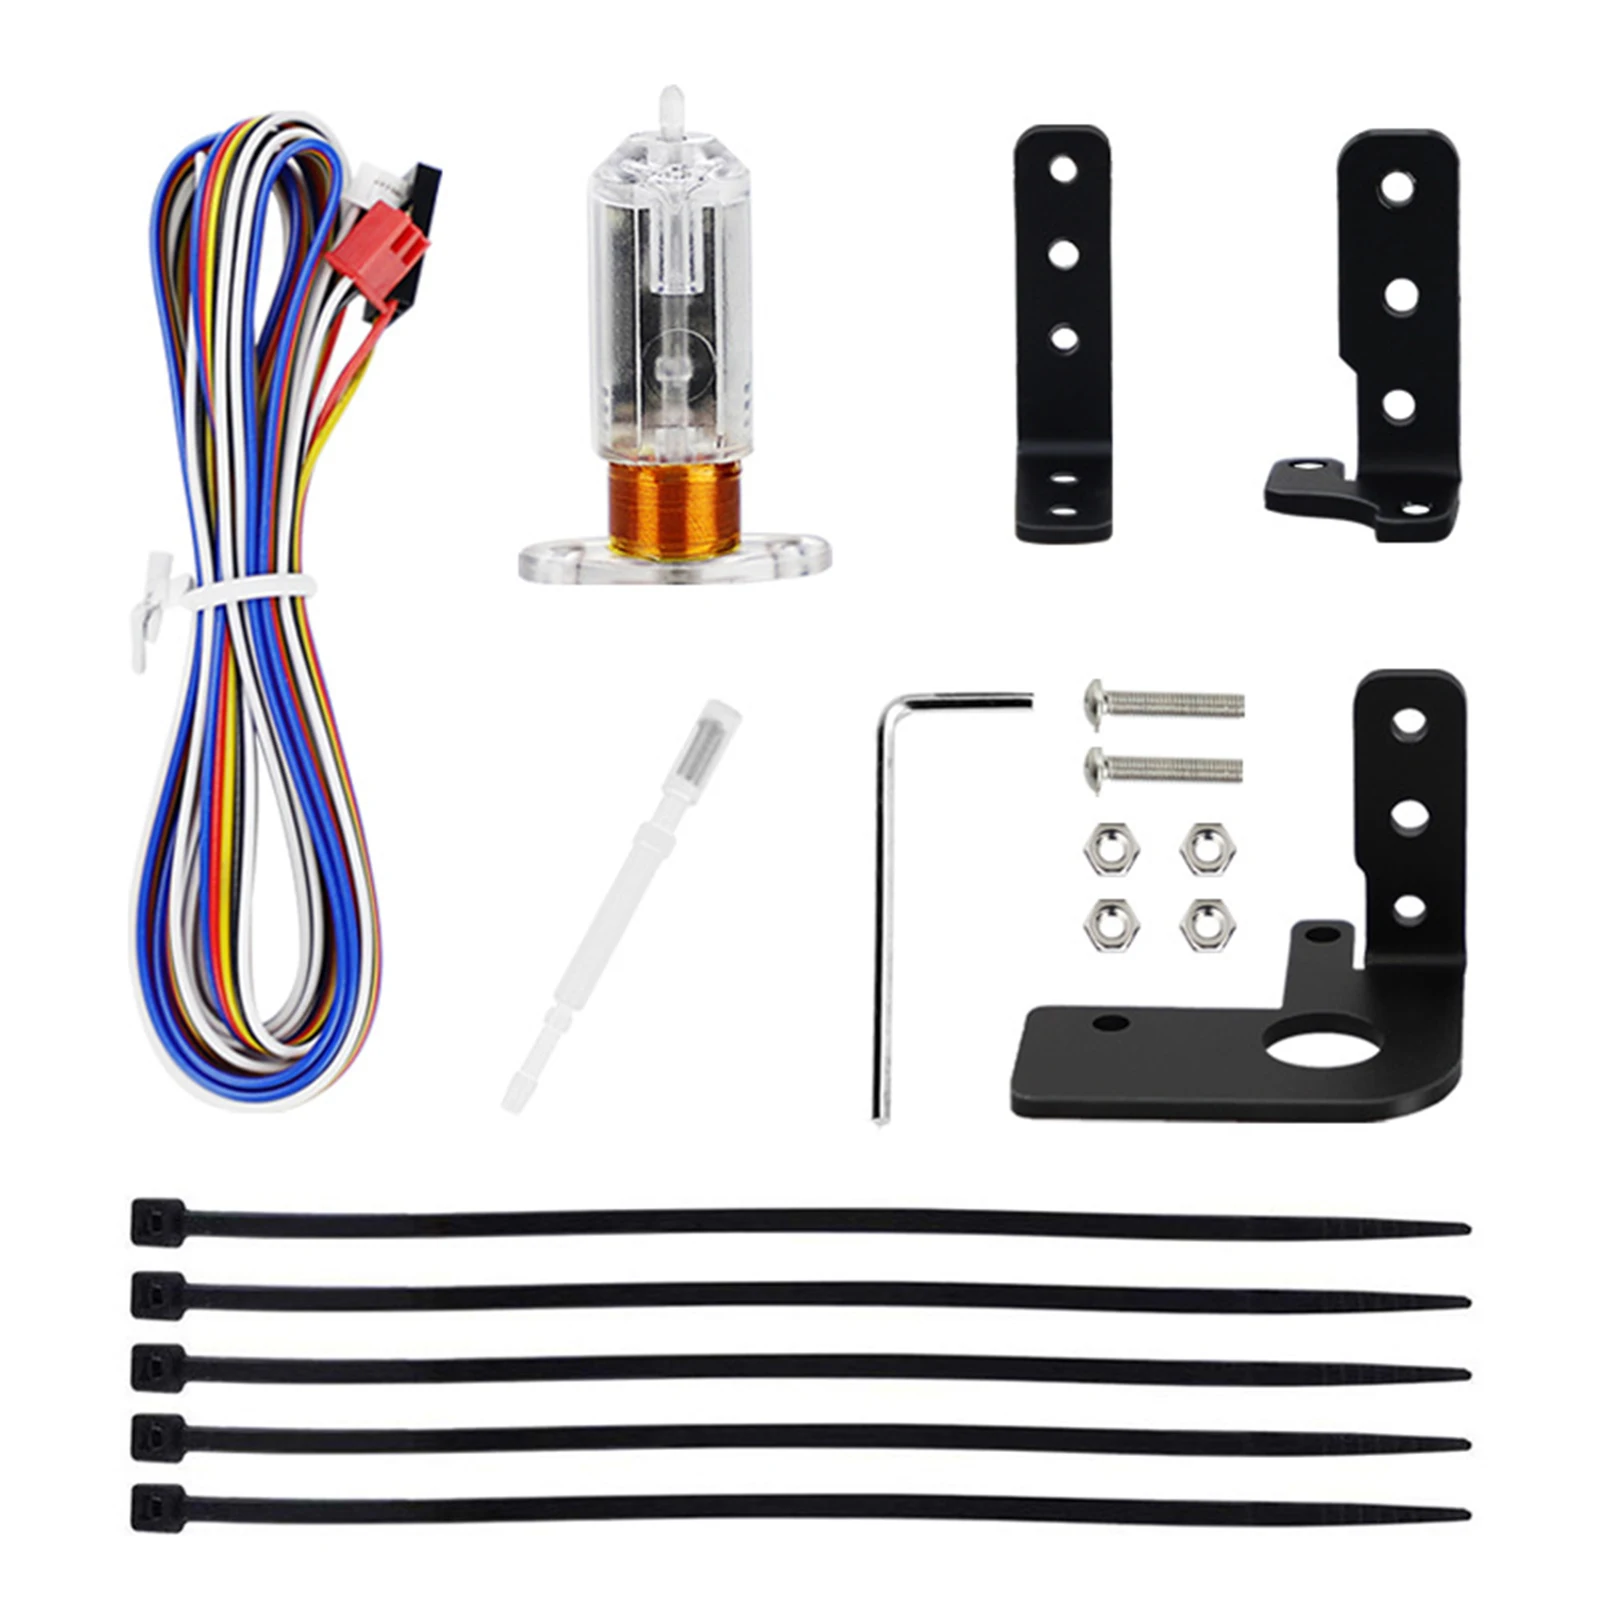 

Auto Leveling Sensor Kit 3D Printer Easy Install Upgrade BL Touch Durable 32 Bit Mainboard Hot Bed Fit For Ender 3 V2 5 Pro